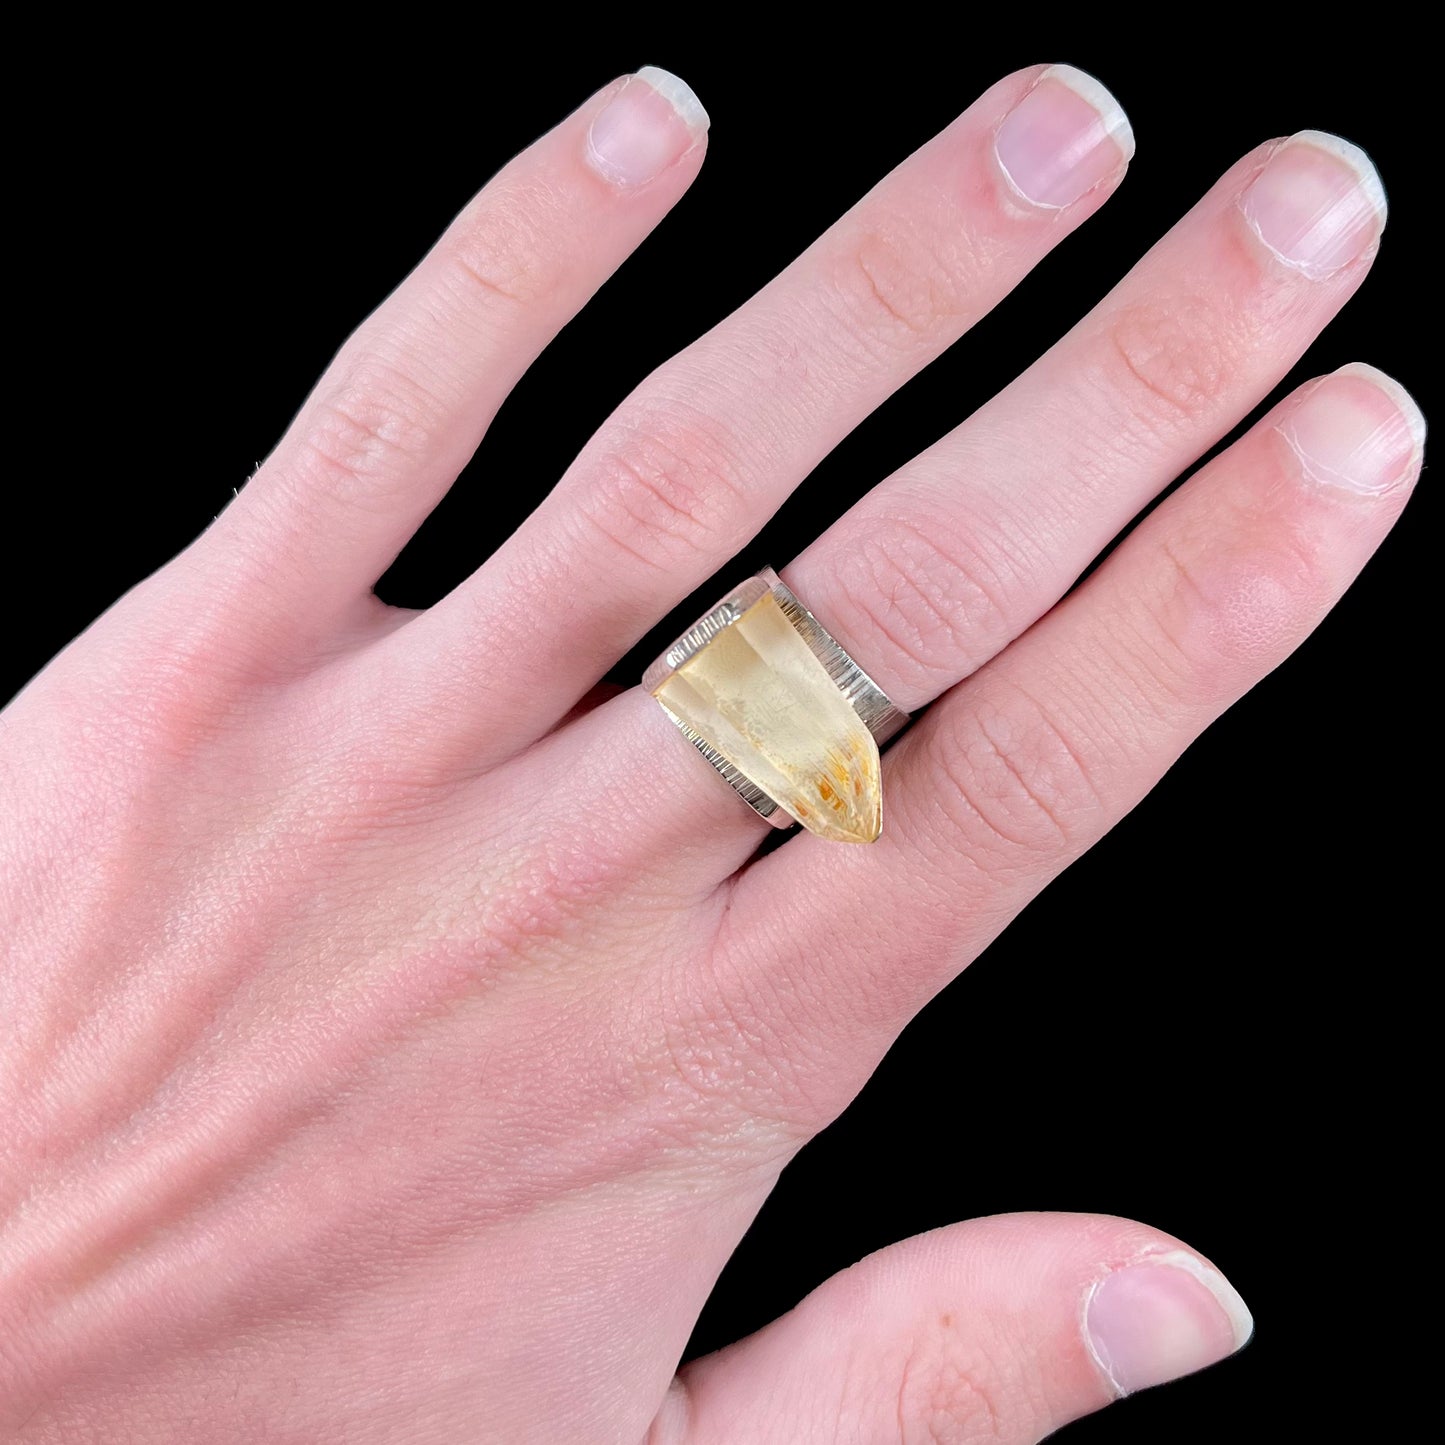 A sterling silver ring set with a naturally terminated yellow citrine quartz crystal.